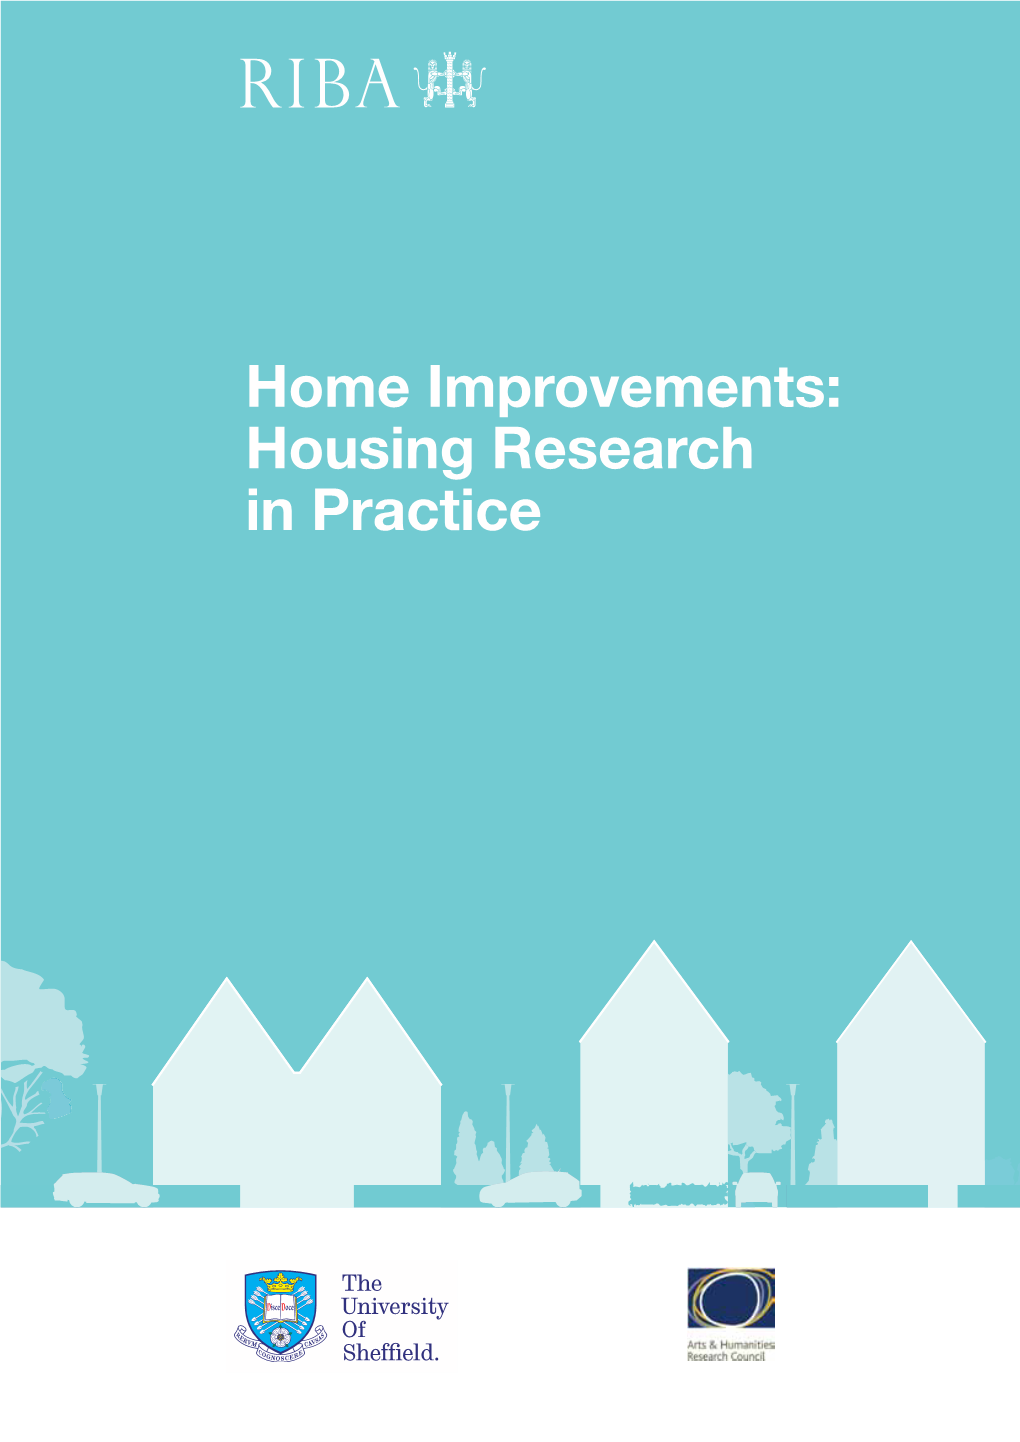 Home Improvements: Housing Research in Practice Contents